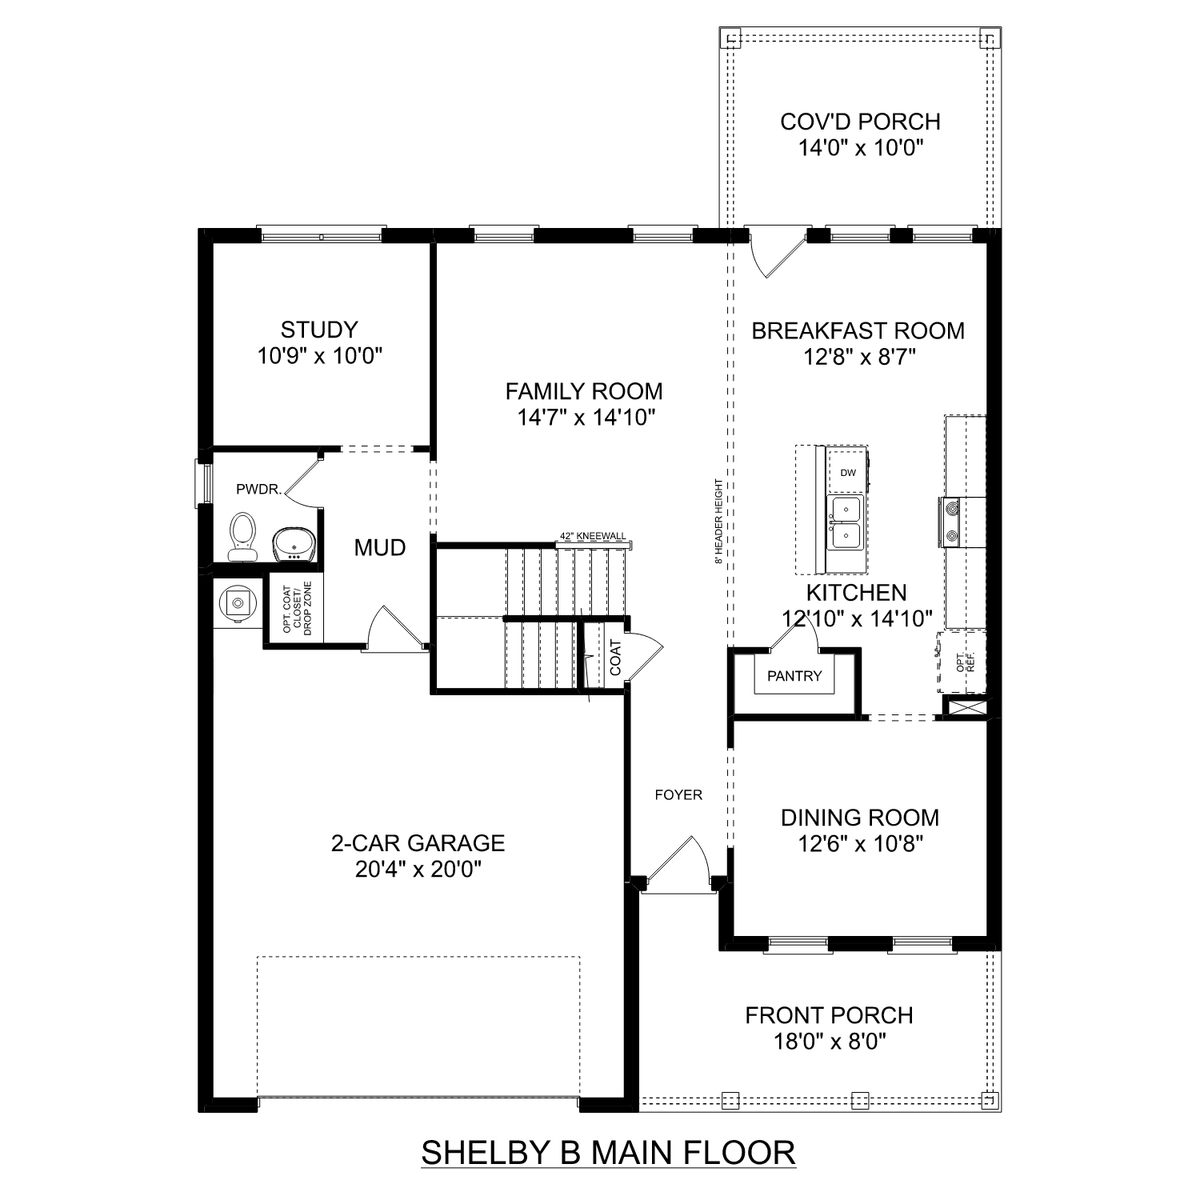 1 - The Shelby B buildable floor plan layout in Davidson Homes' Hollon Meadows community.